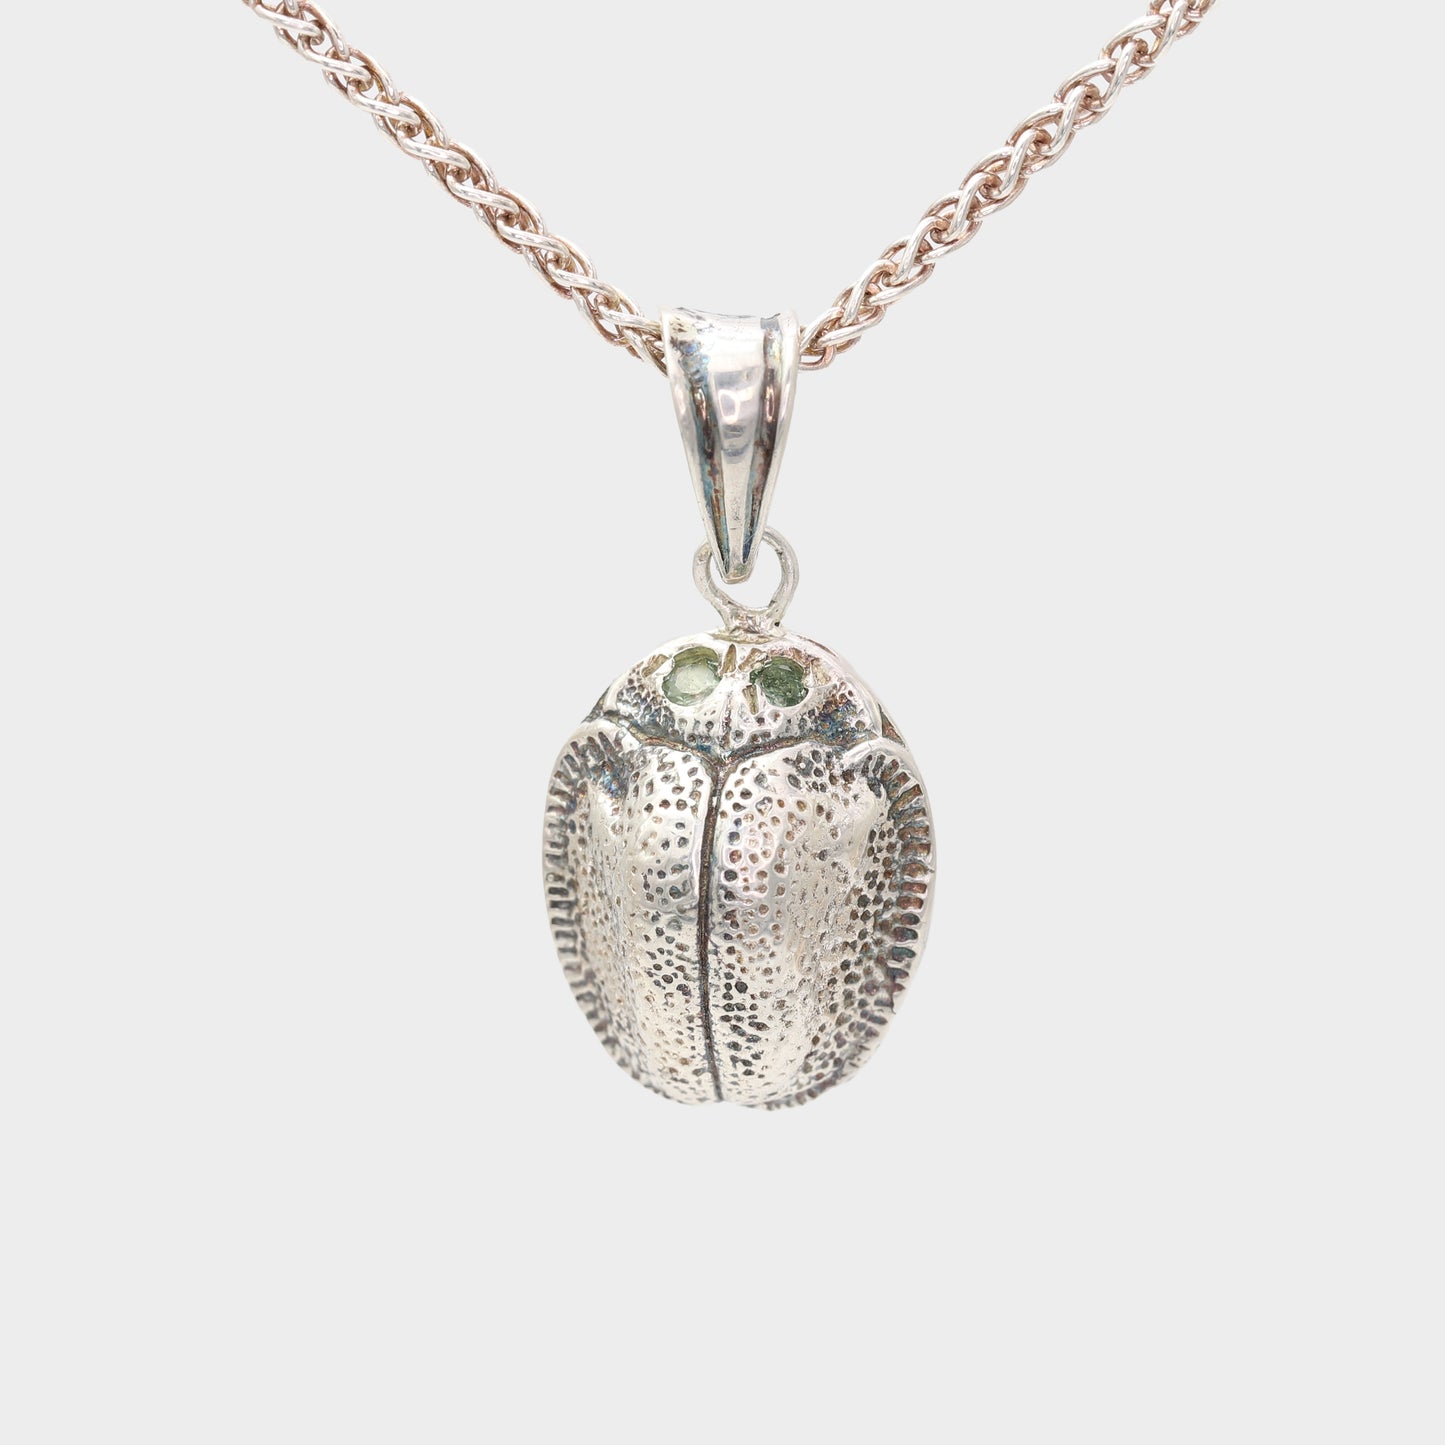 Silver Scarab Pendant with Matched Tourmaline Eyes